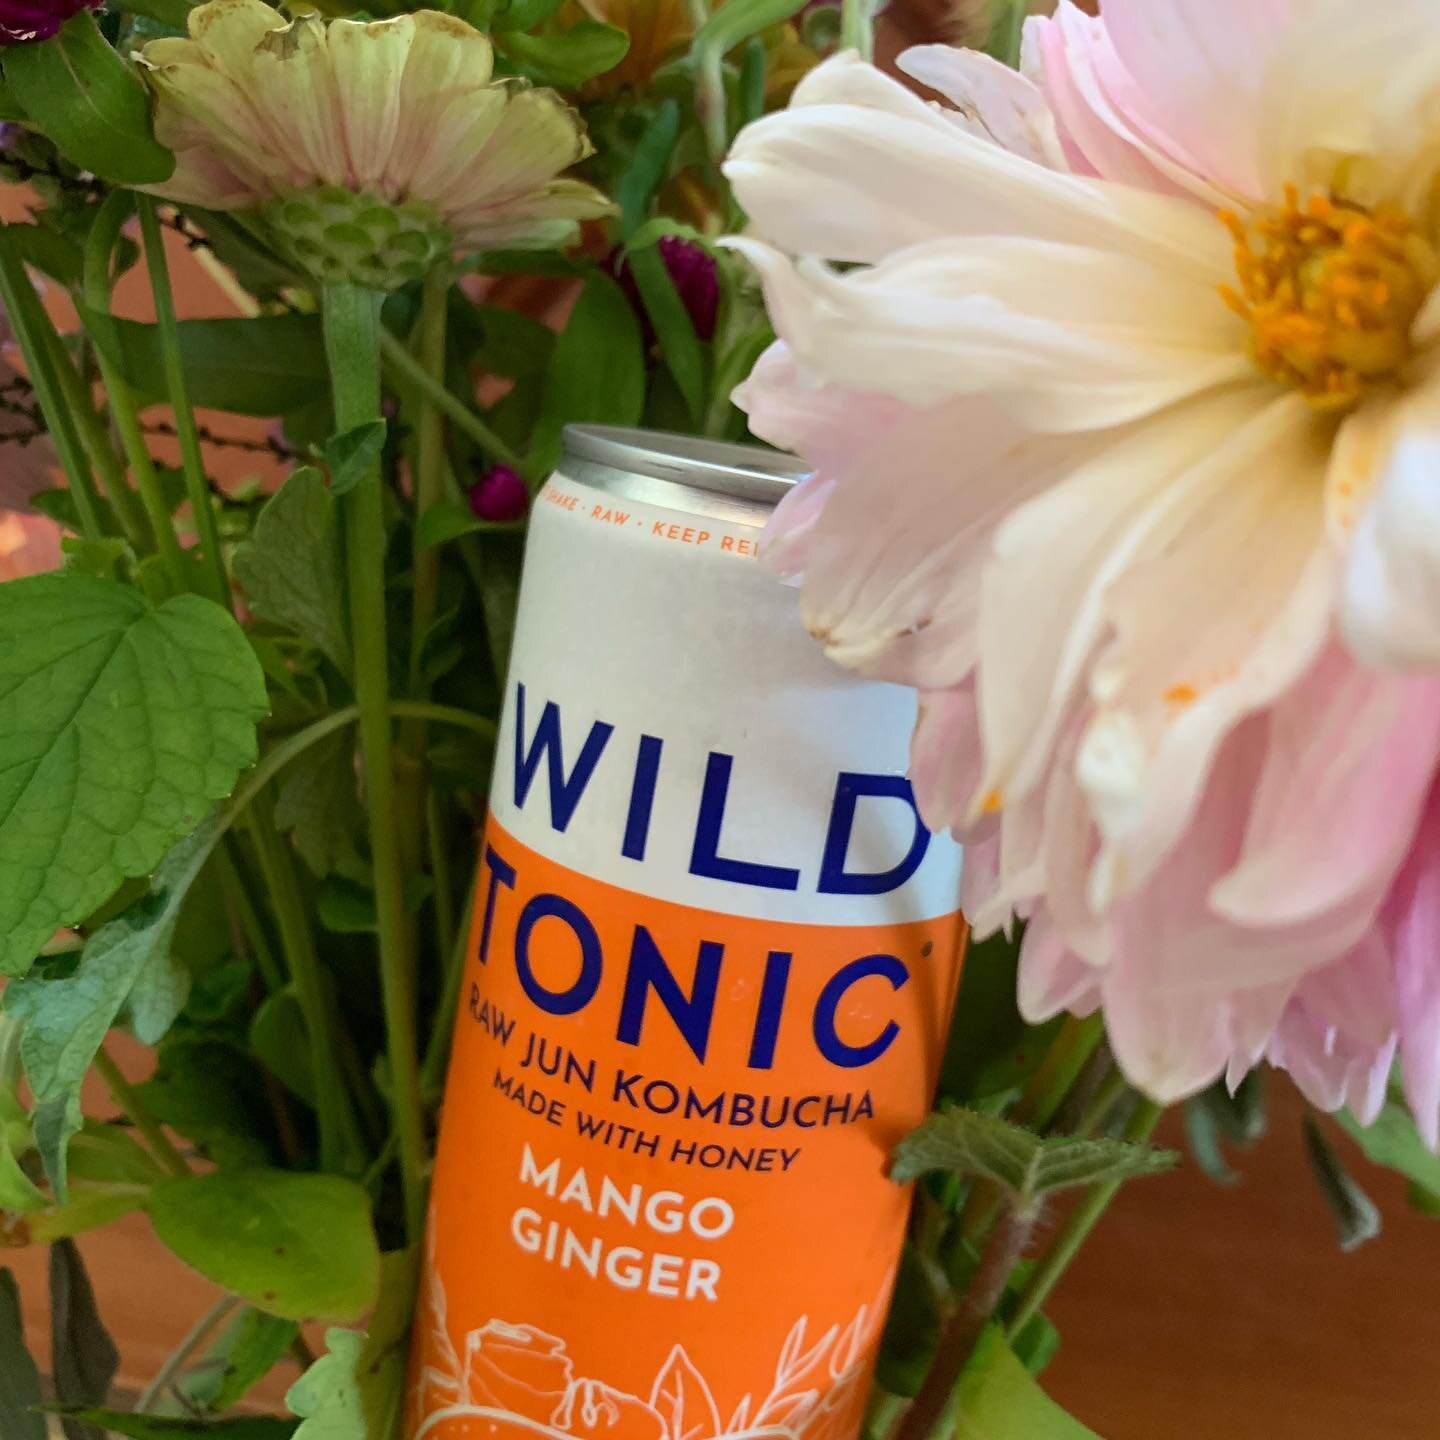 have you read our latest feature friday? @drinkwildtonic is as amazing as it looks! our full interview with founder Holly is linked in our bio